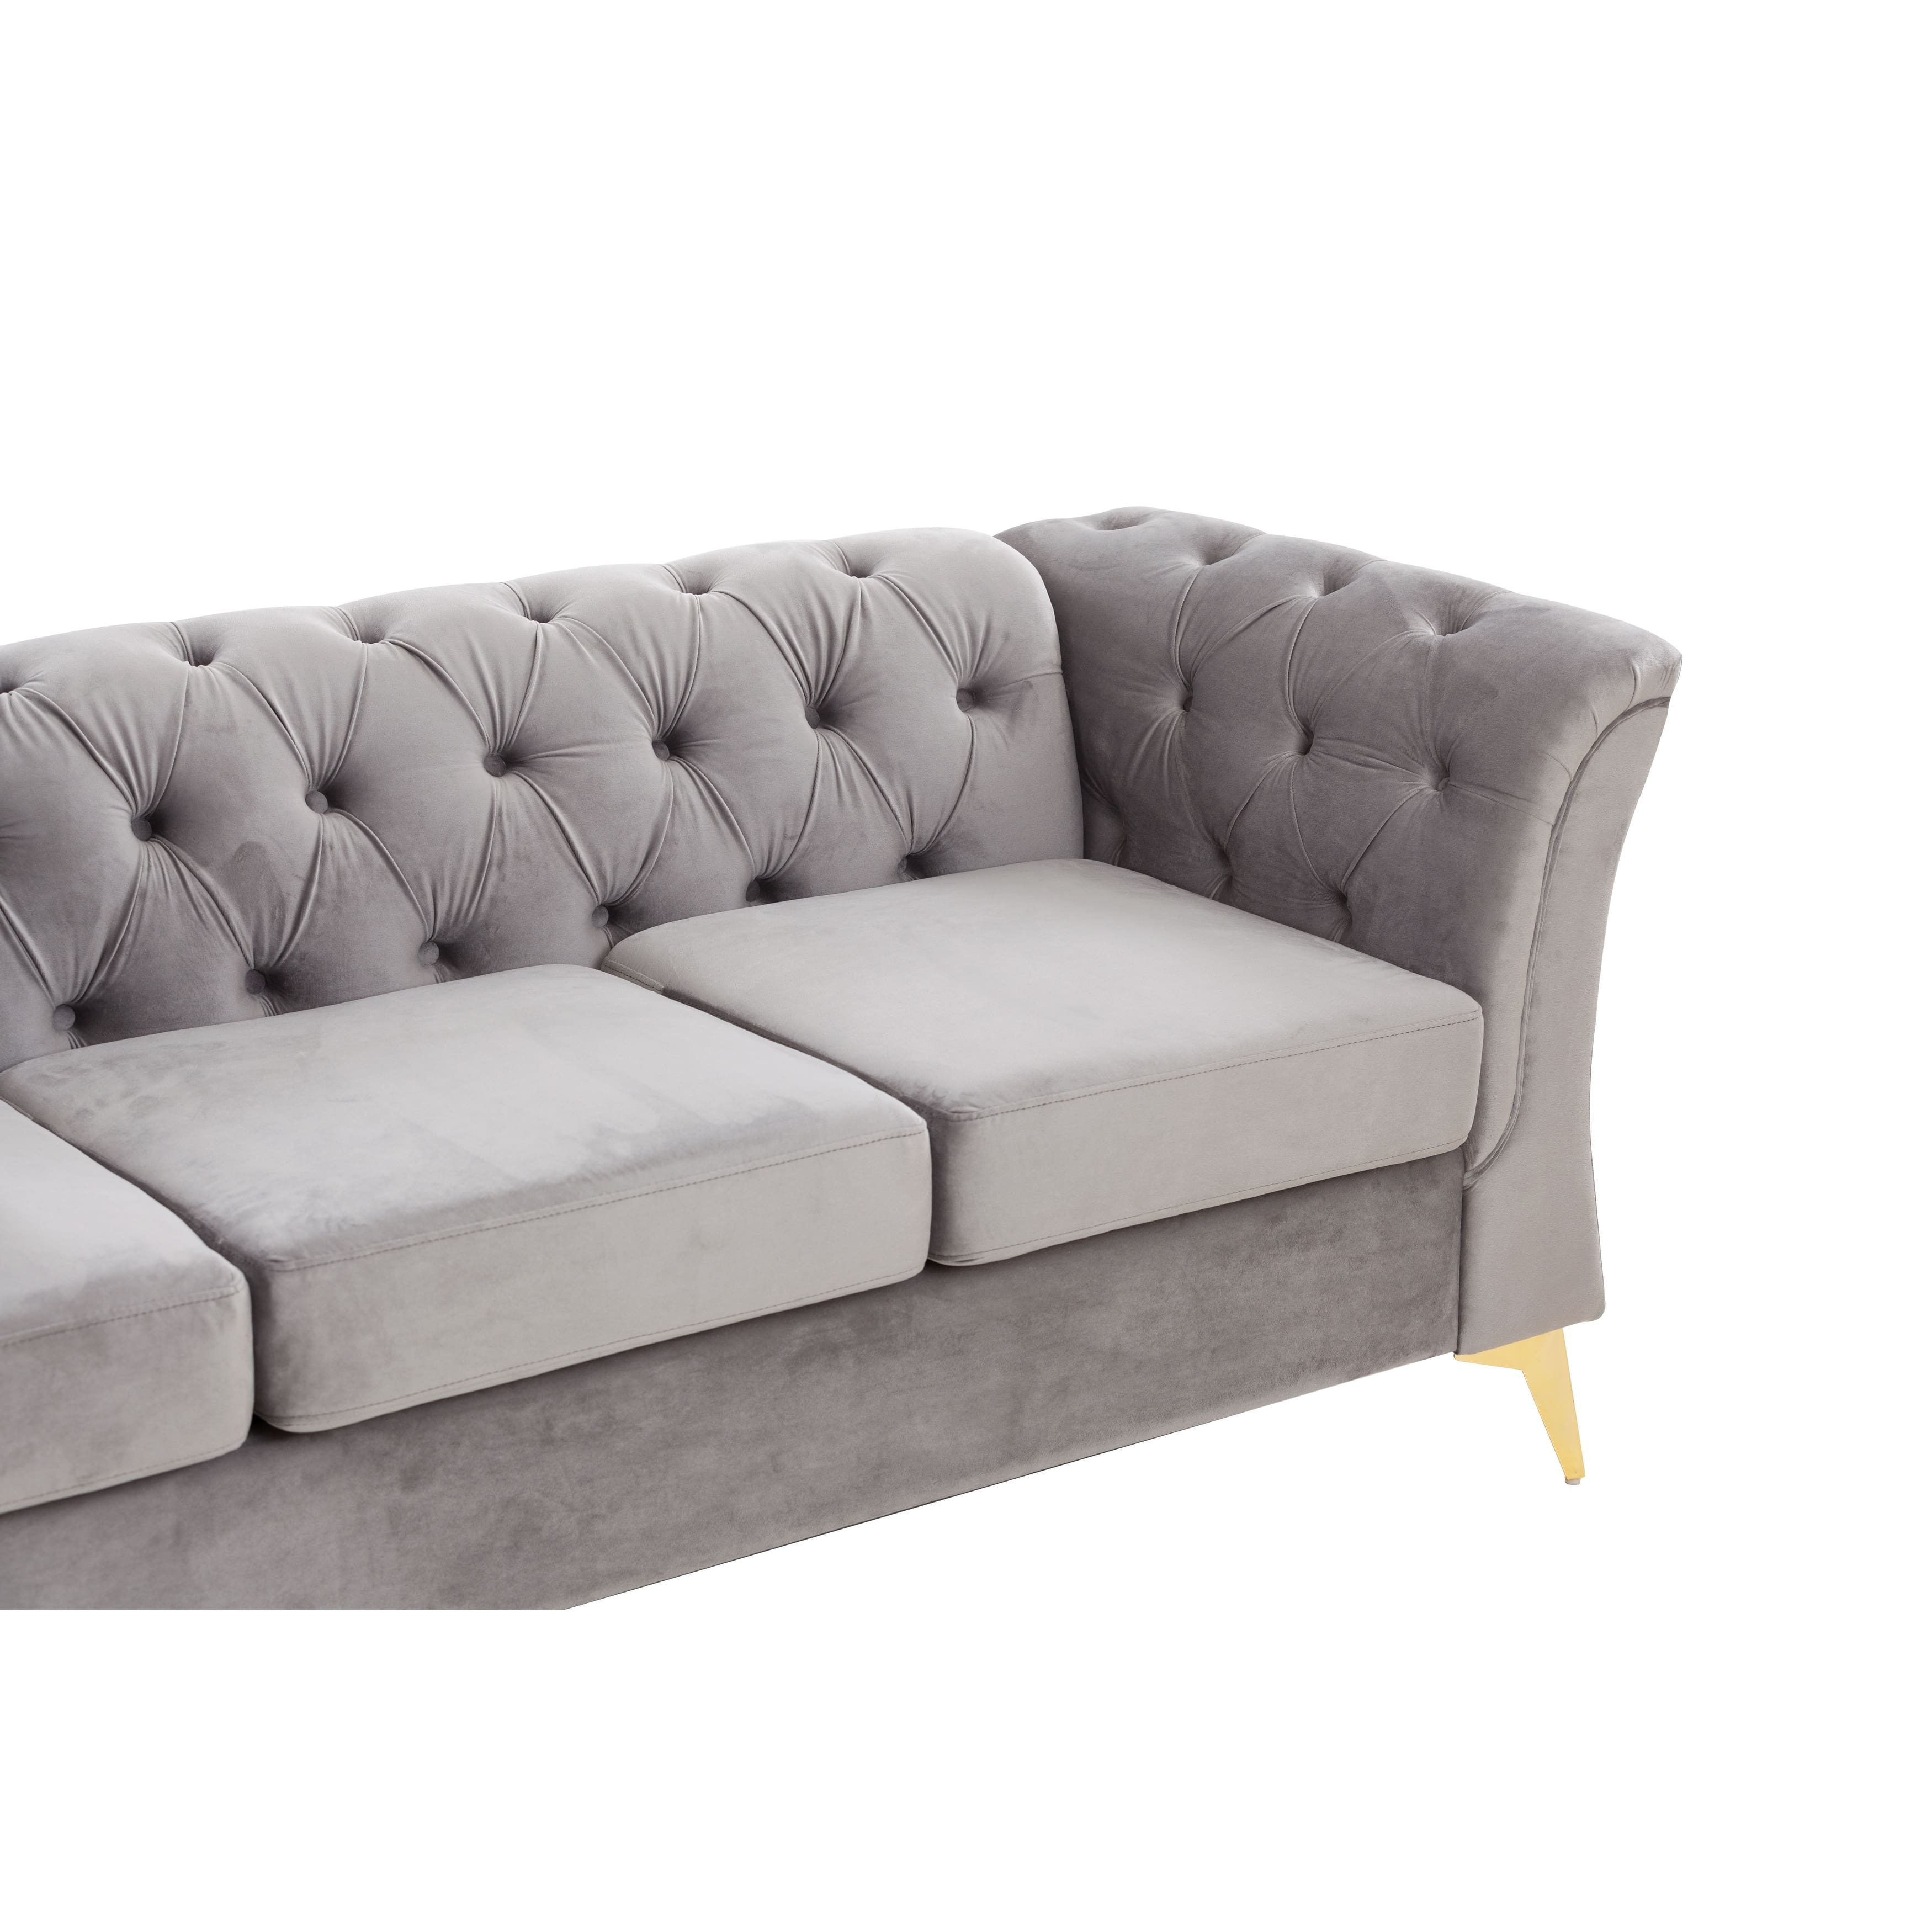 Velvet Tufted Couch Sofa with Gold Metal Legs, Comfortable 3-Seat ...